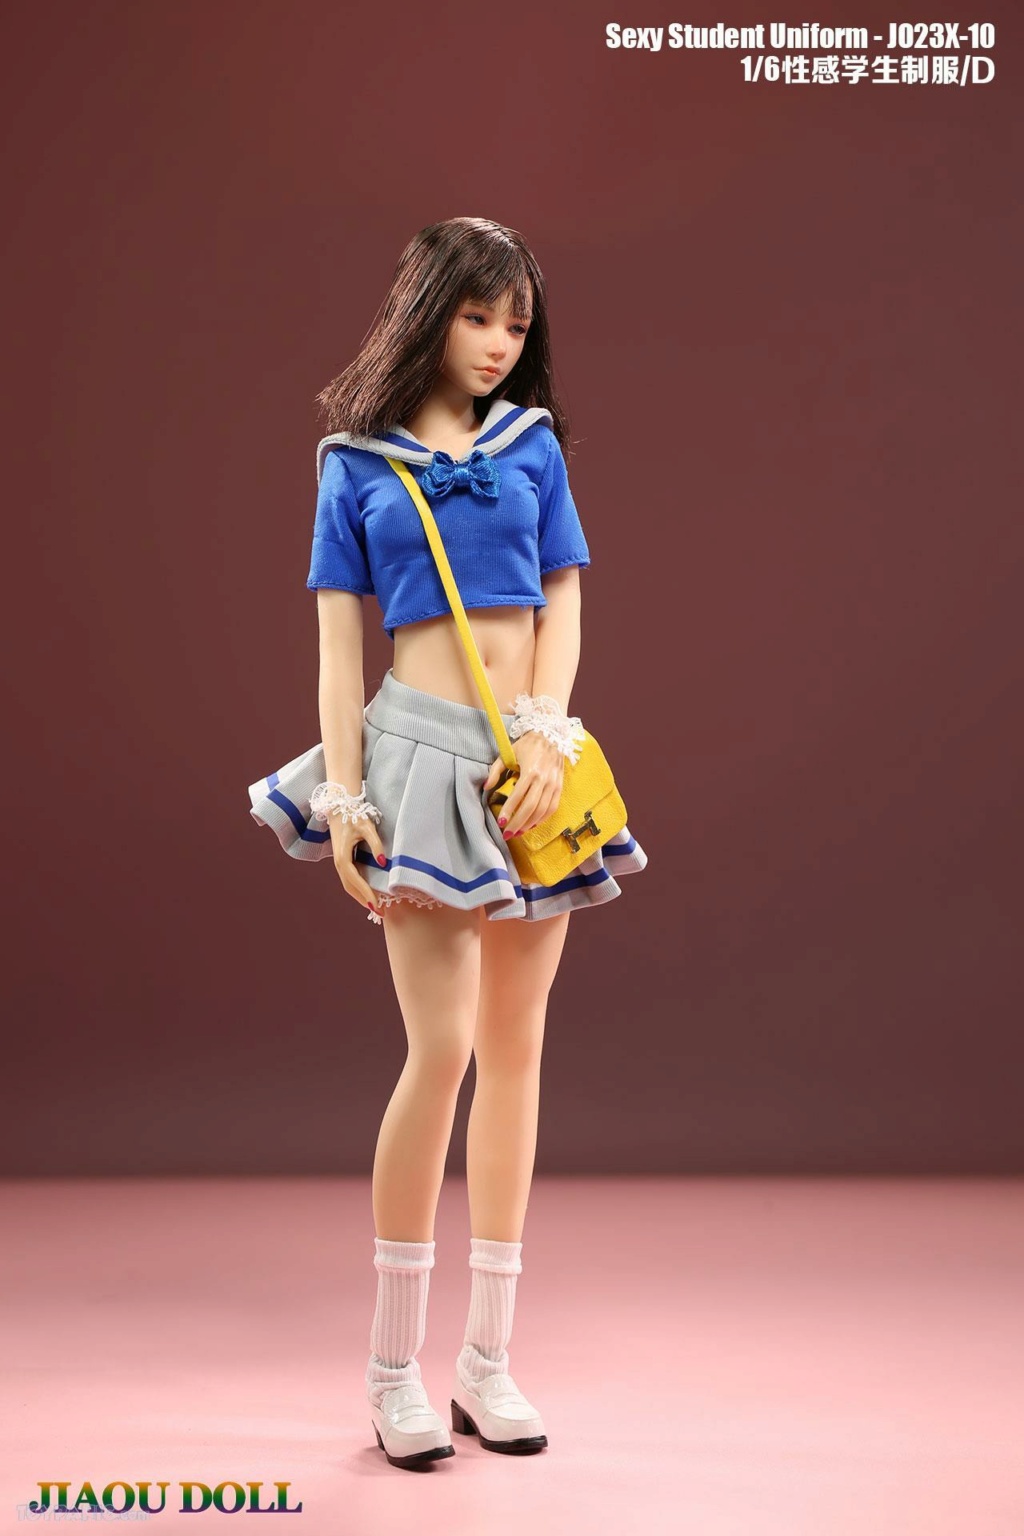 SexyStudentUniform - NEW PRODUCT: Jiaou Doll: 1/6 Sexy Student Uniform (7 color options) (JO23X-10A-G) (NSFW) 20920231